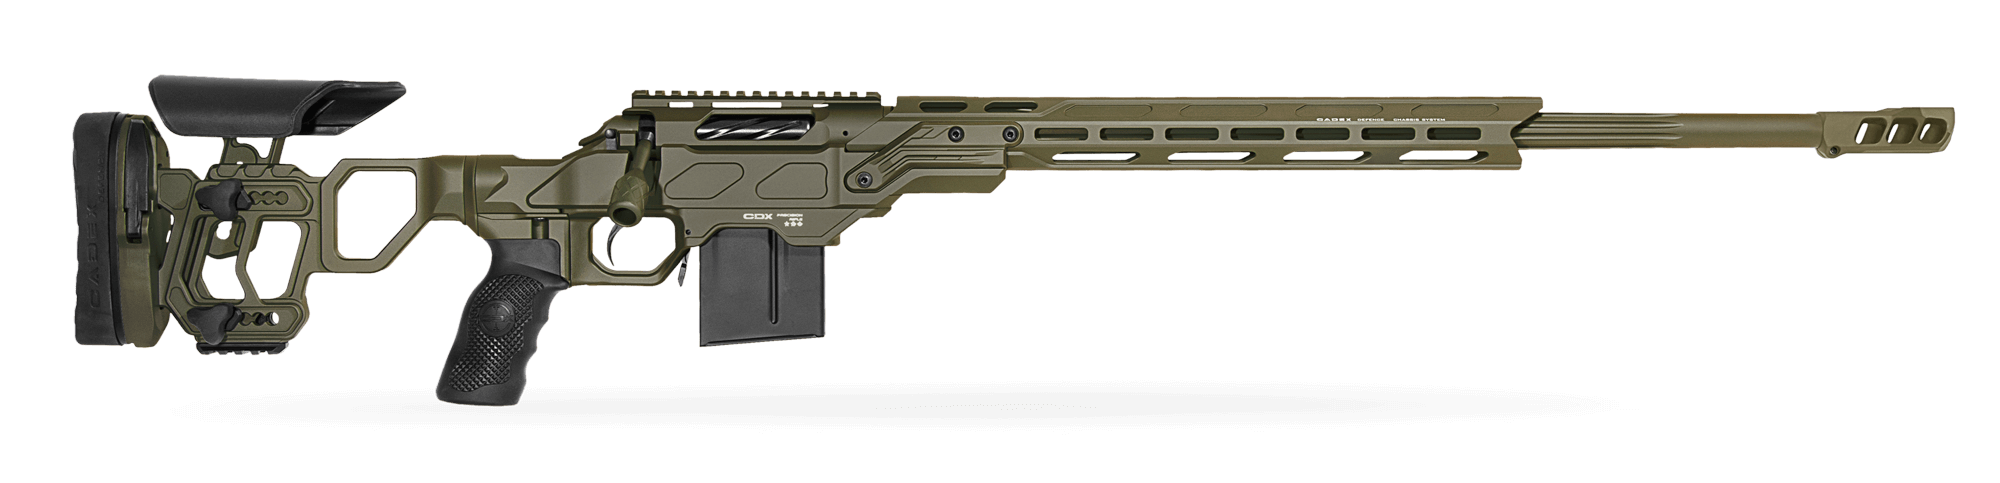 Cadex Defense CDX-R7 Sniper Rifle - Finished Projects - Blender Artists  Community